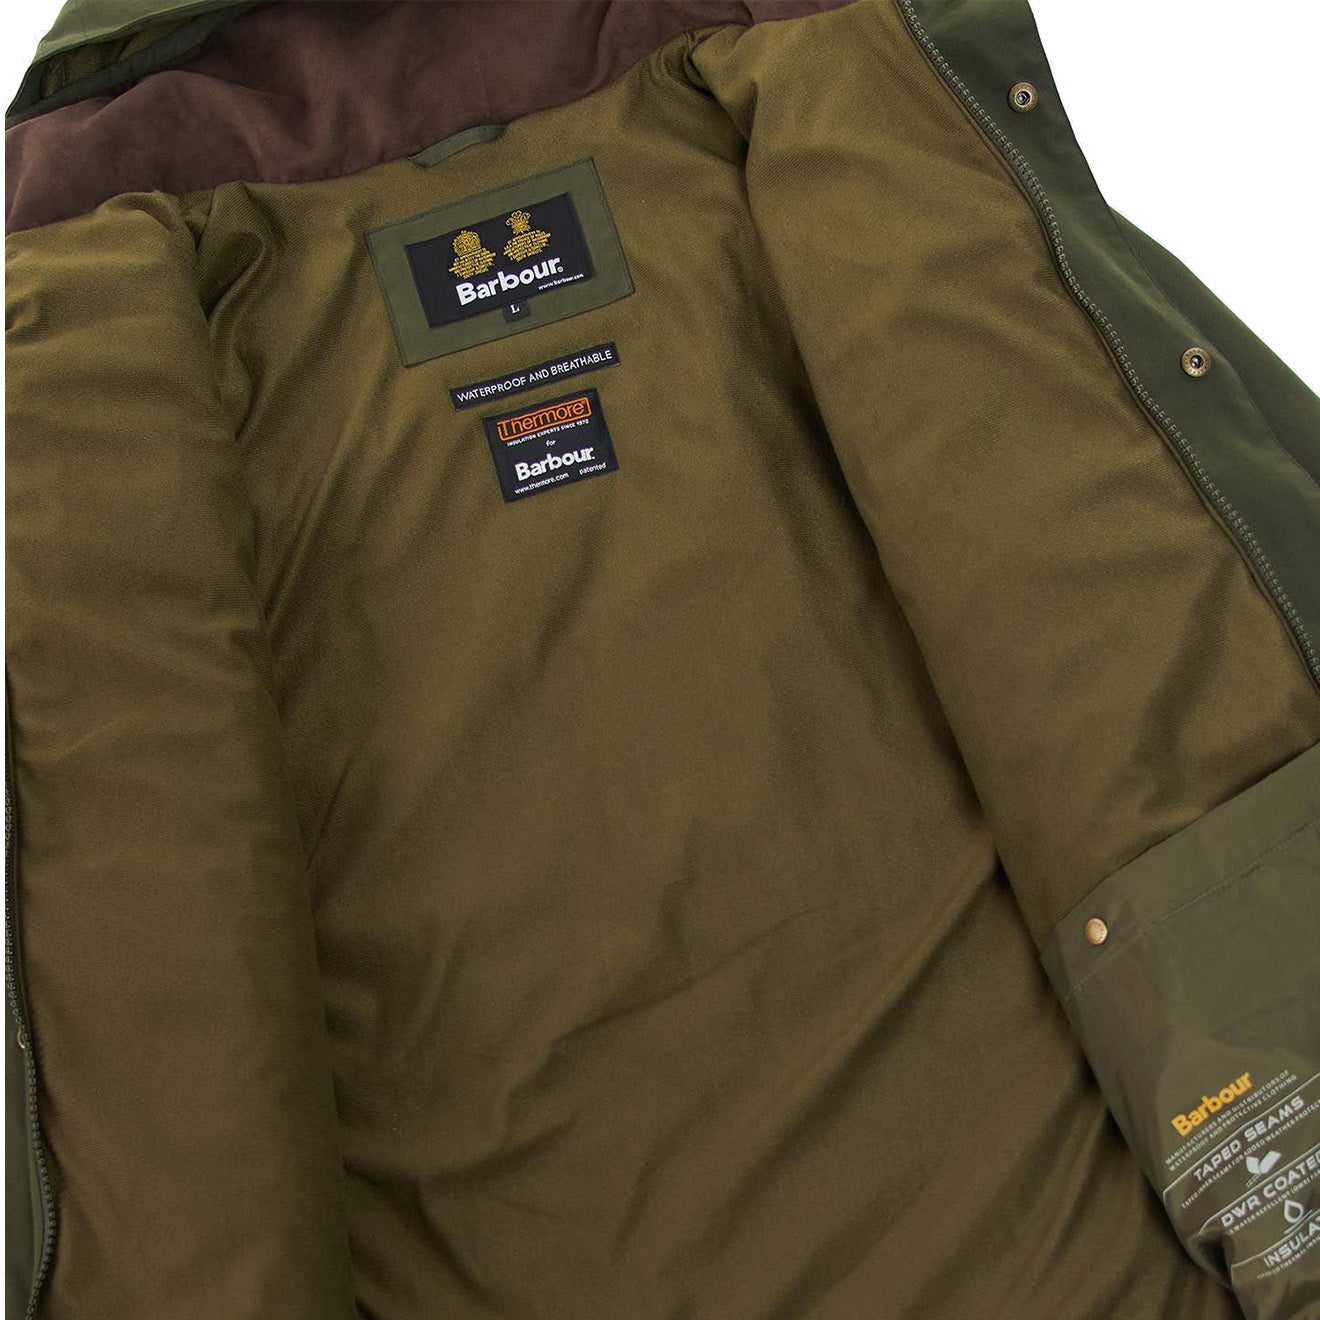 Barbour Beaconsfield Jacket Olive | The Sporting Lodge